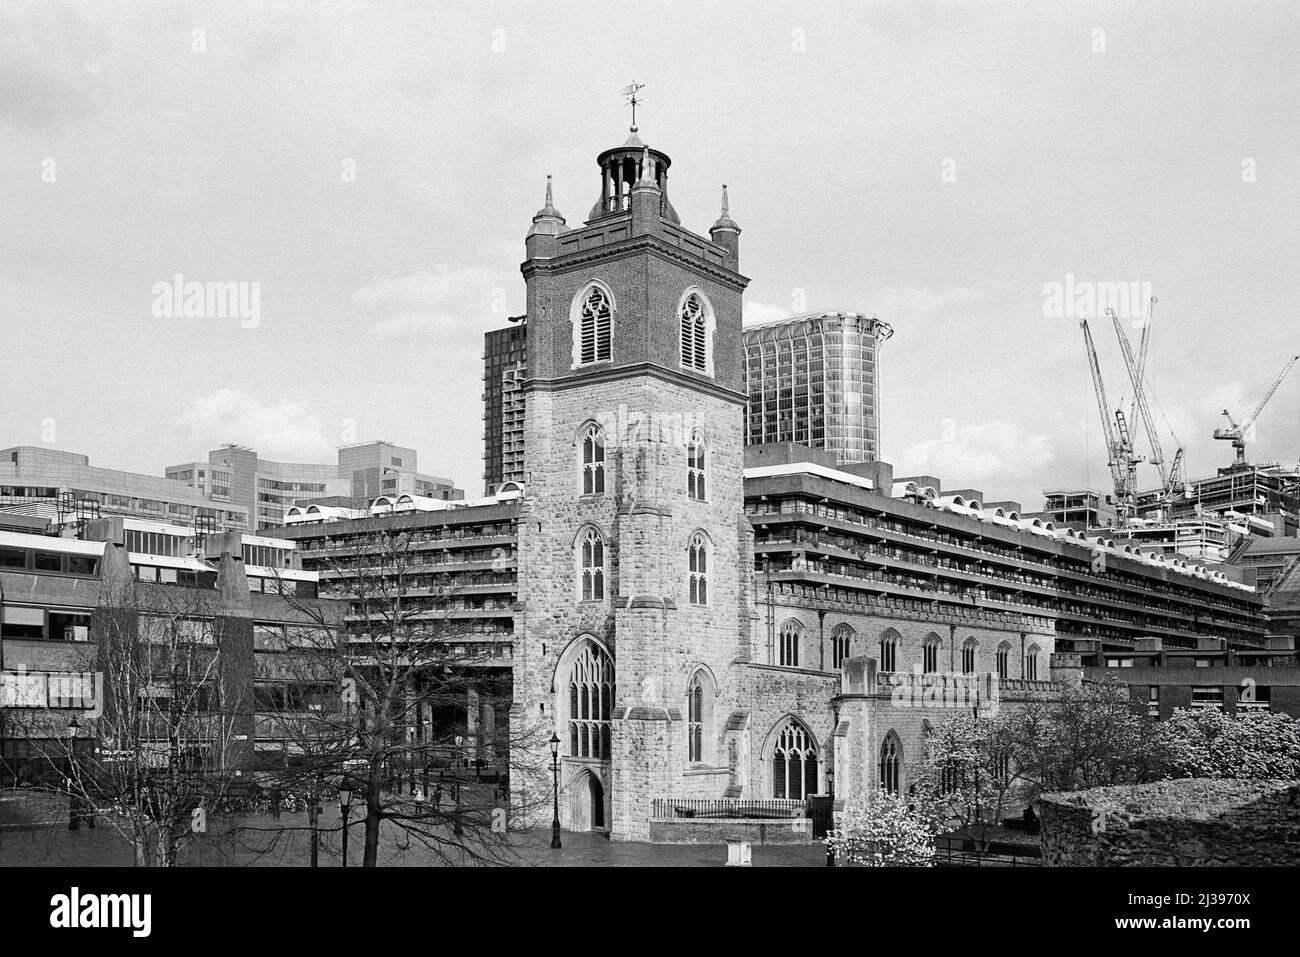 St Giles-without-Cripplegate church in the Barbican Centre, looking towards the city of London, UK Stock Photo